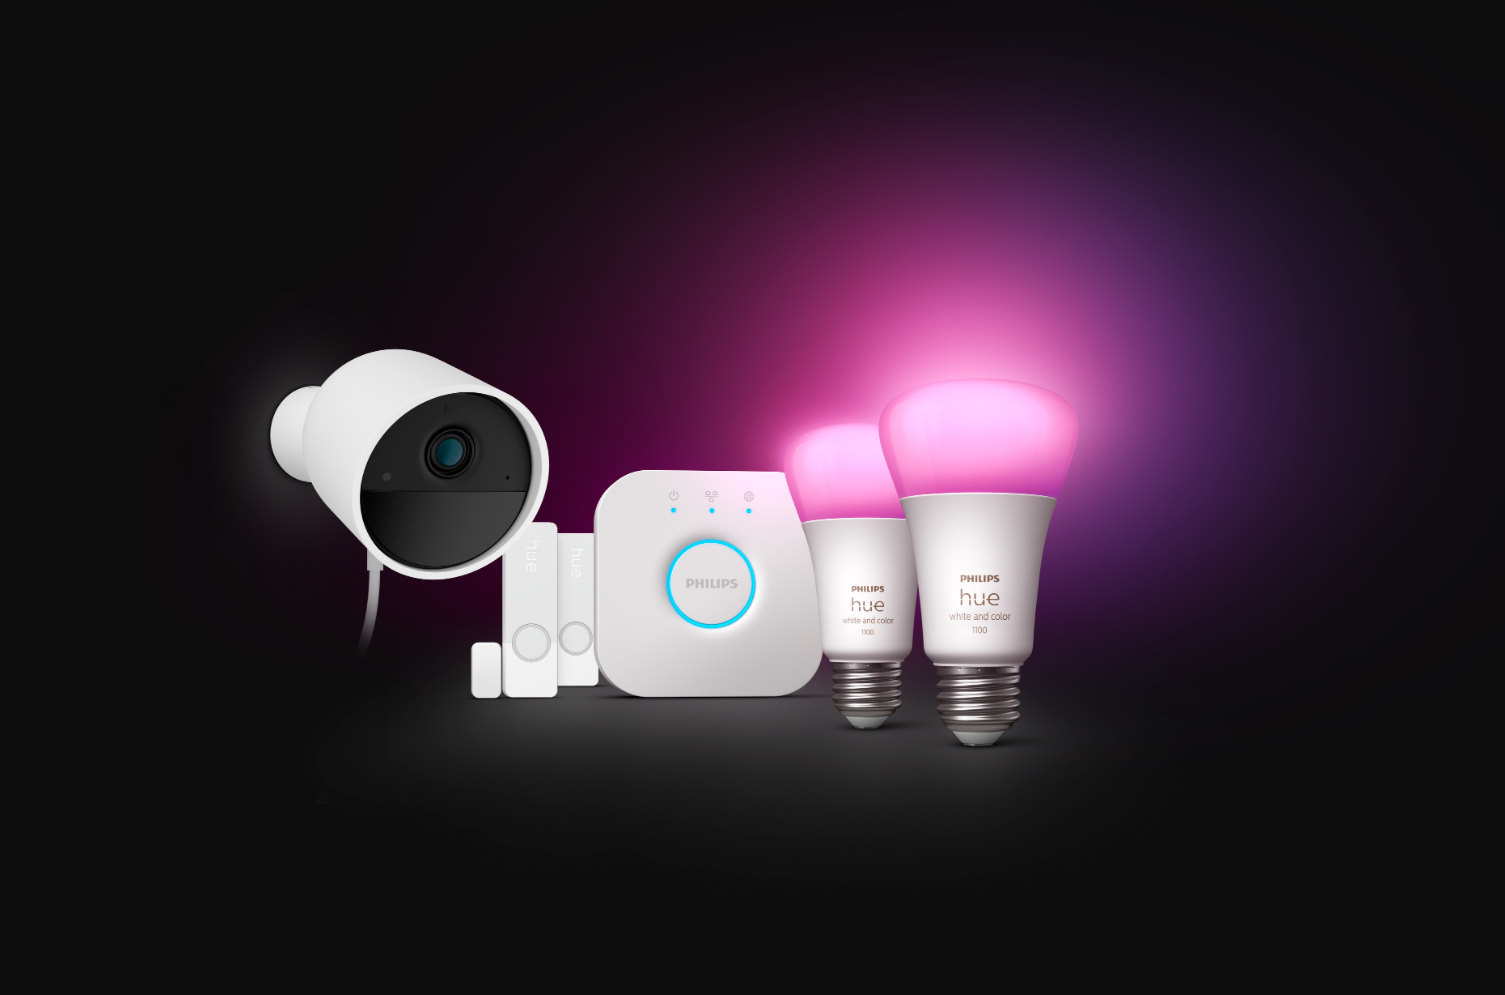 Philips Hue Has New Home Lighting Options and a New Security System Available